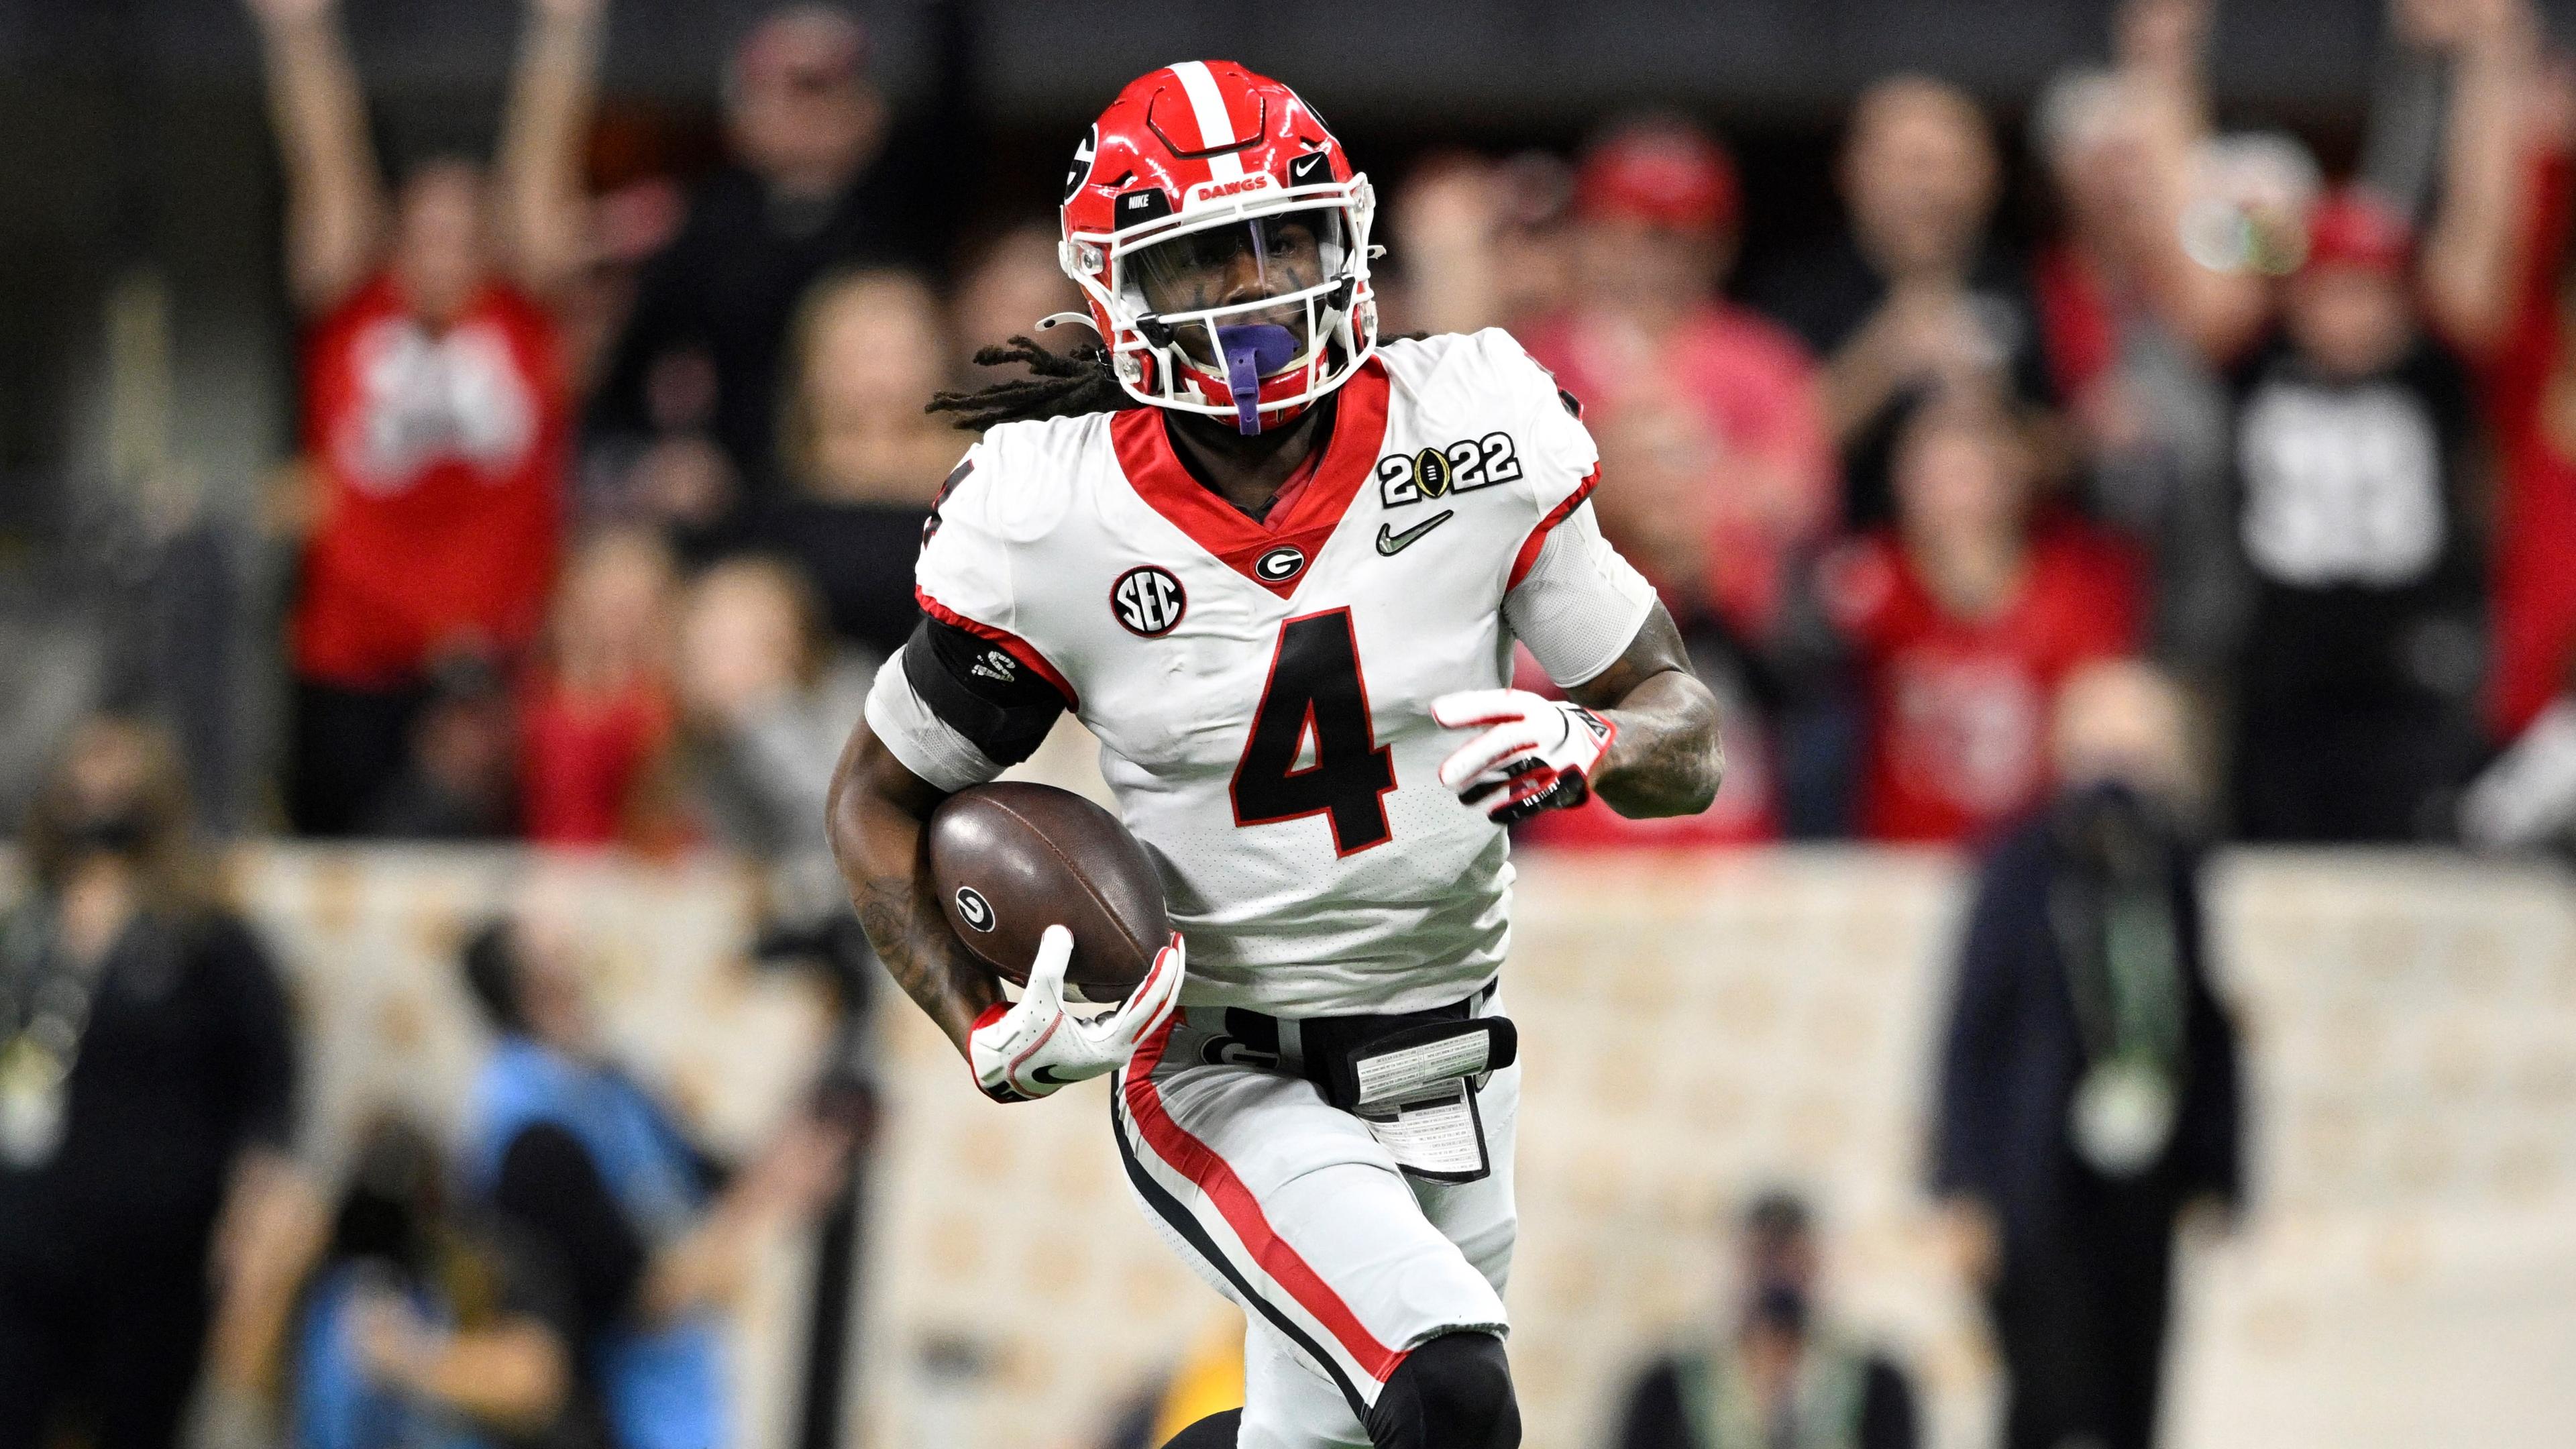 Georgia Bulldogs running back James Cook (4) runs the ball against the Alabama Crimson Tide in the third quarter during the 2022 CFP college football national championship game at Lucas Oil Stadium. / Marc Lebryk - USA TODAY Sports